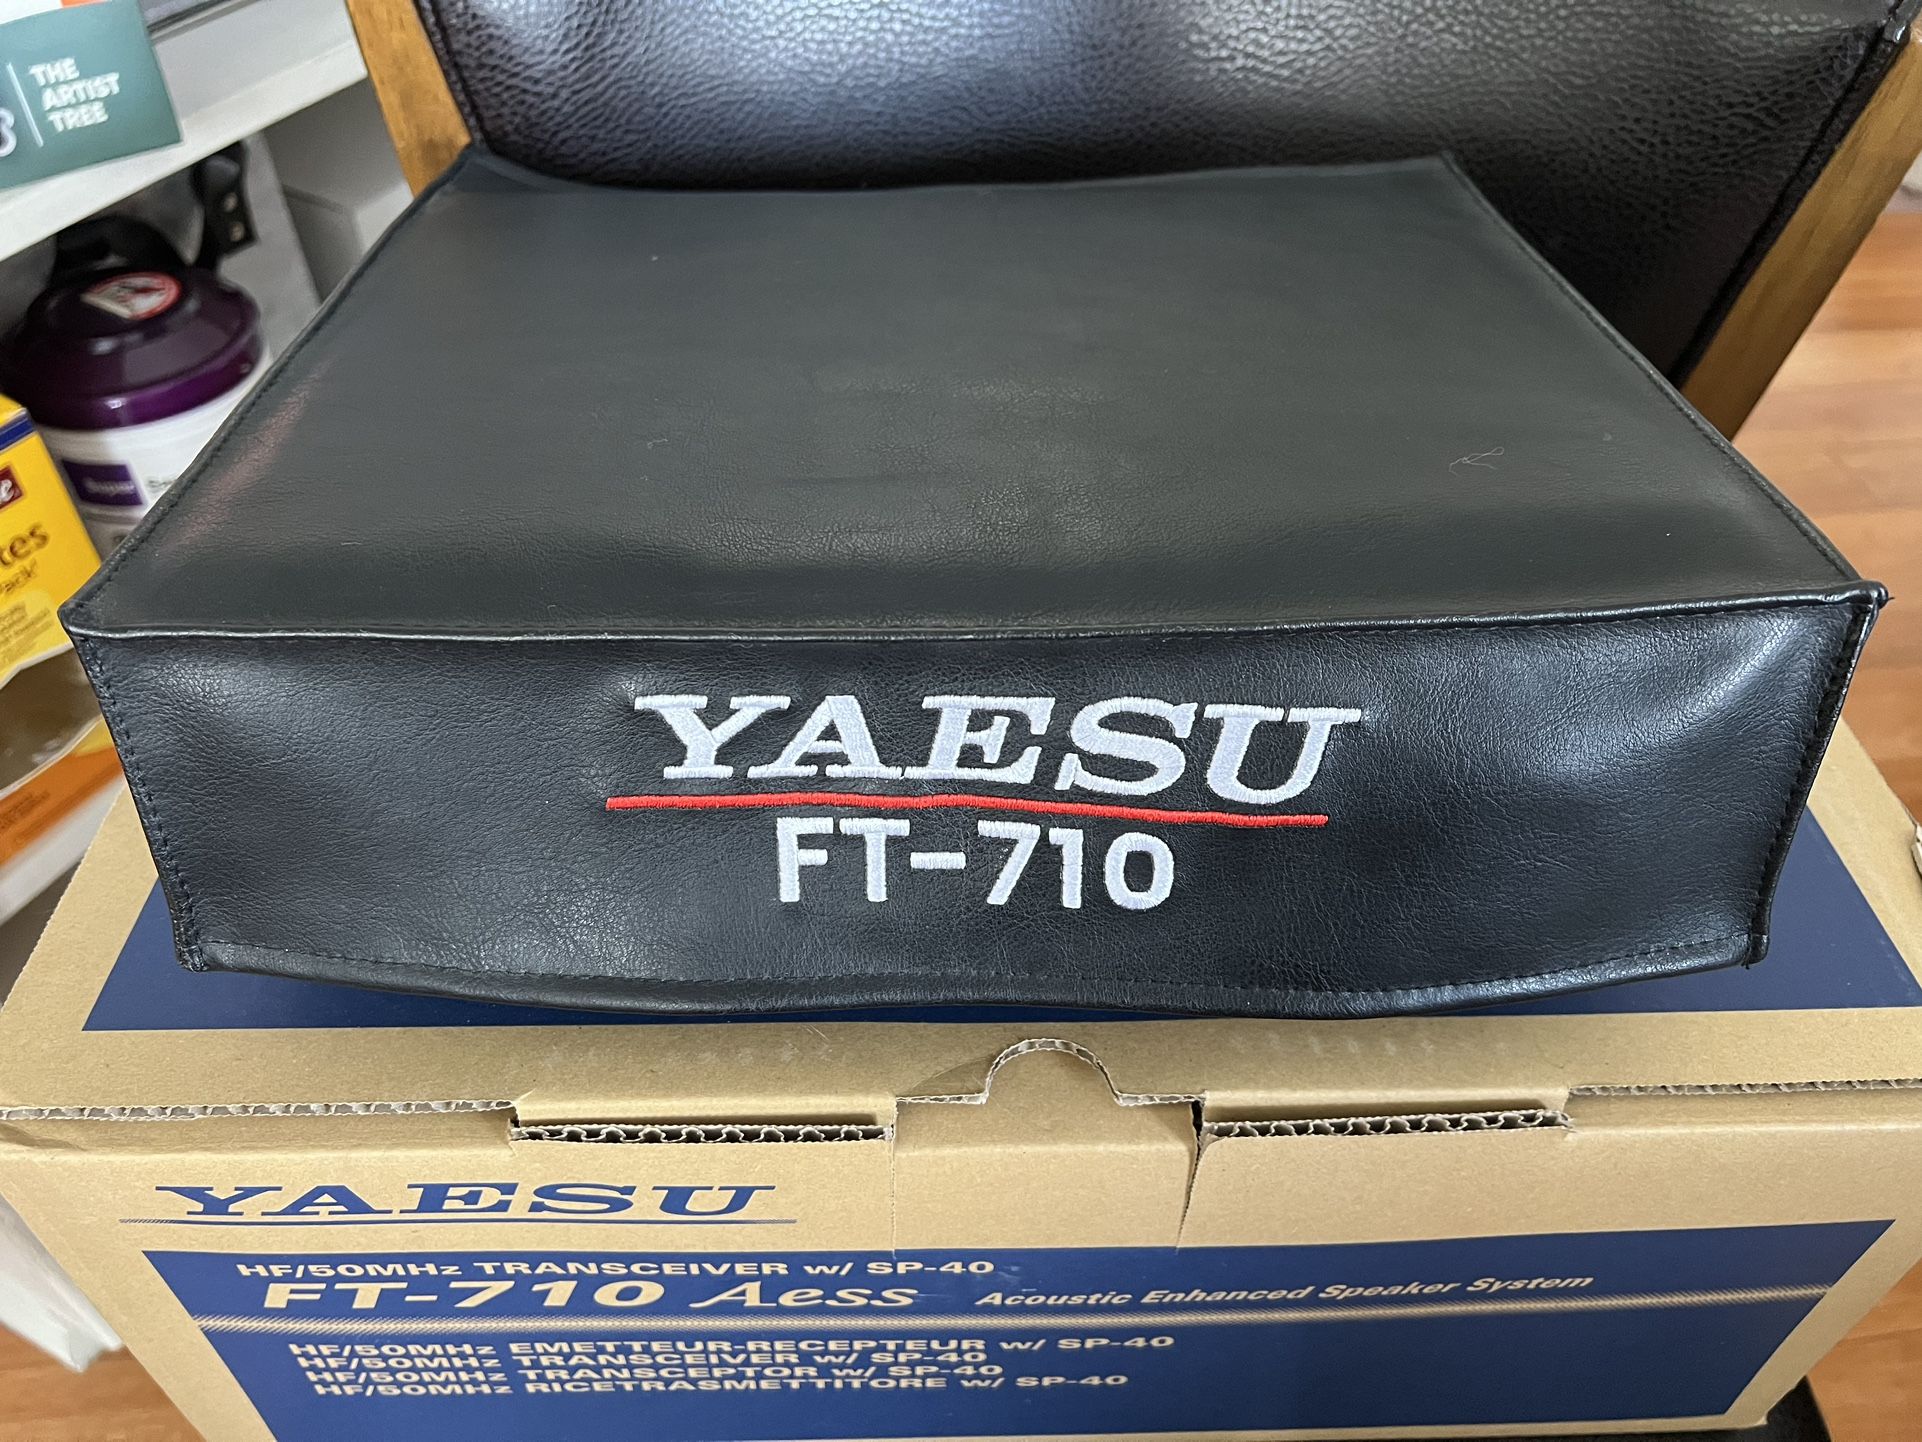 Yaesu FT-710 AESS - With Extras- Diamond CP-5HS Antenna - Auto Tuner And Switching Power Supply